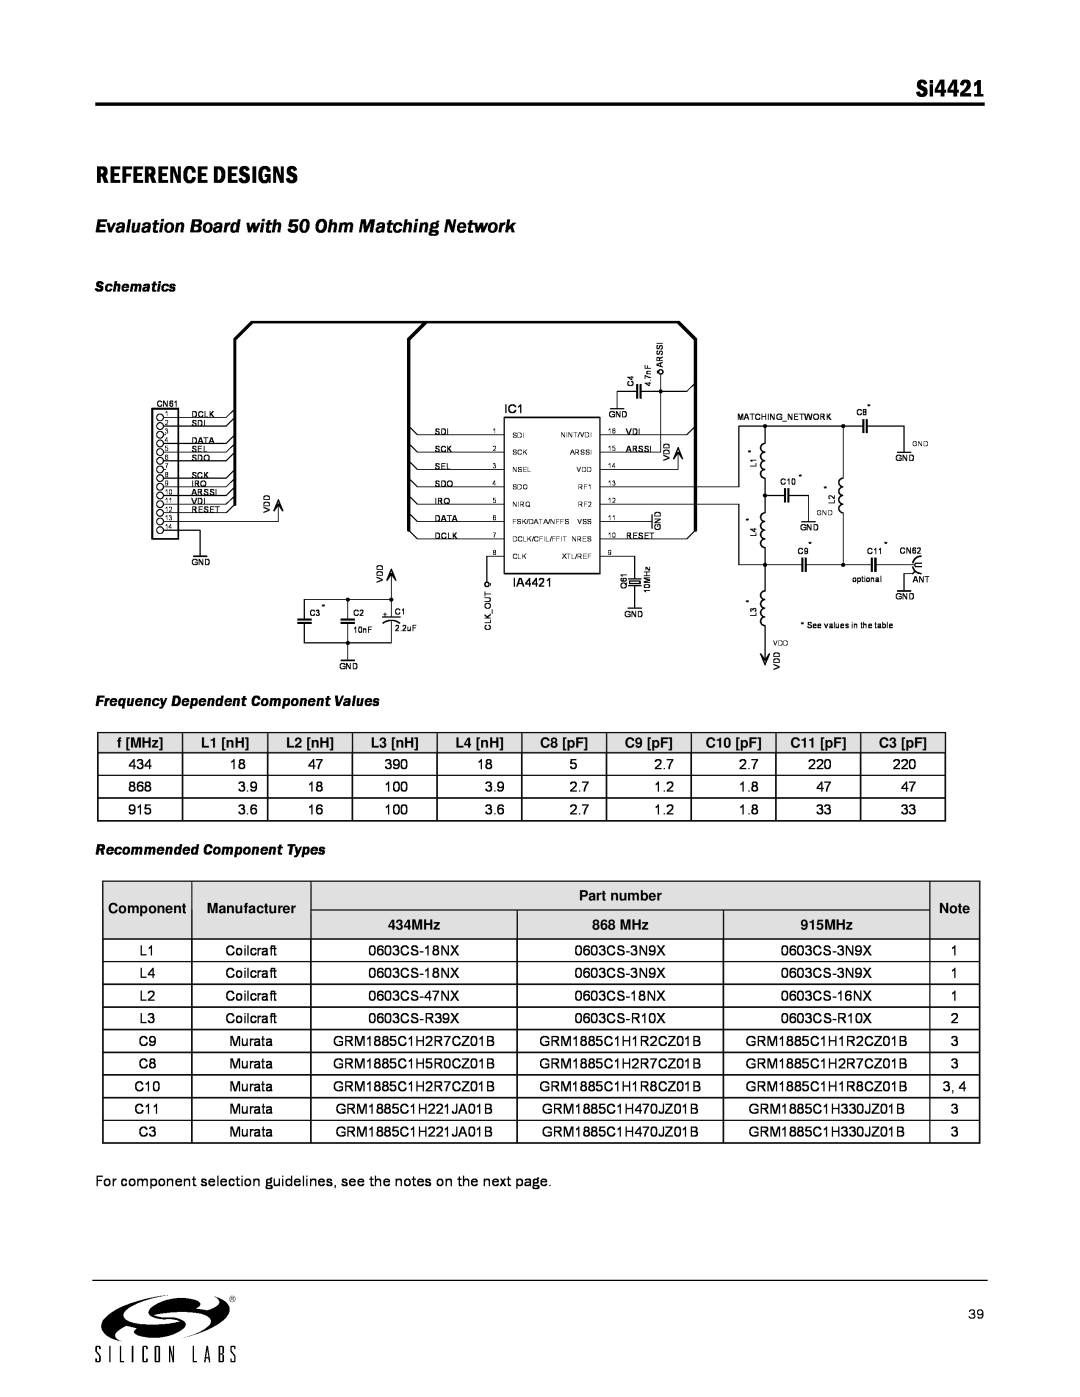 Silicon Laboratories SI4421 manual Si4421 REFERENCE DESIGNS, Evaluation Board with 50 Ohm Matching Network, Schematics 